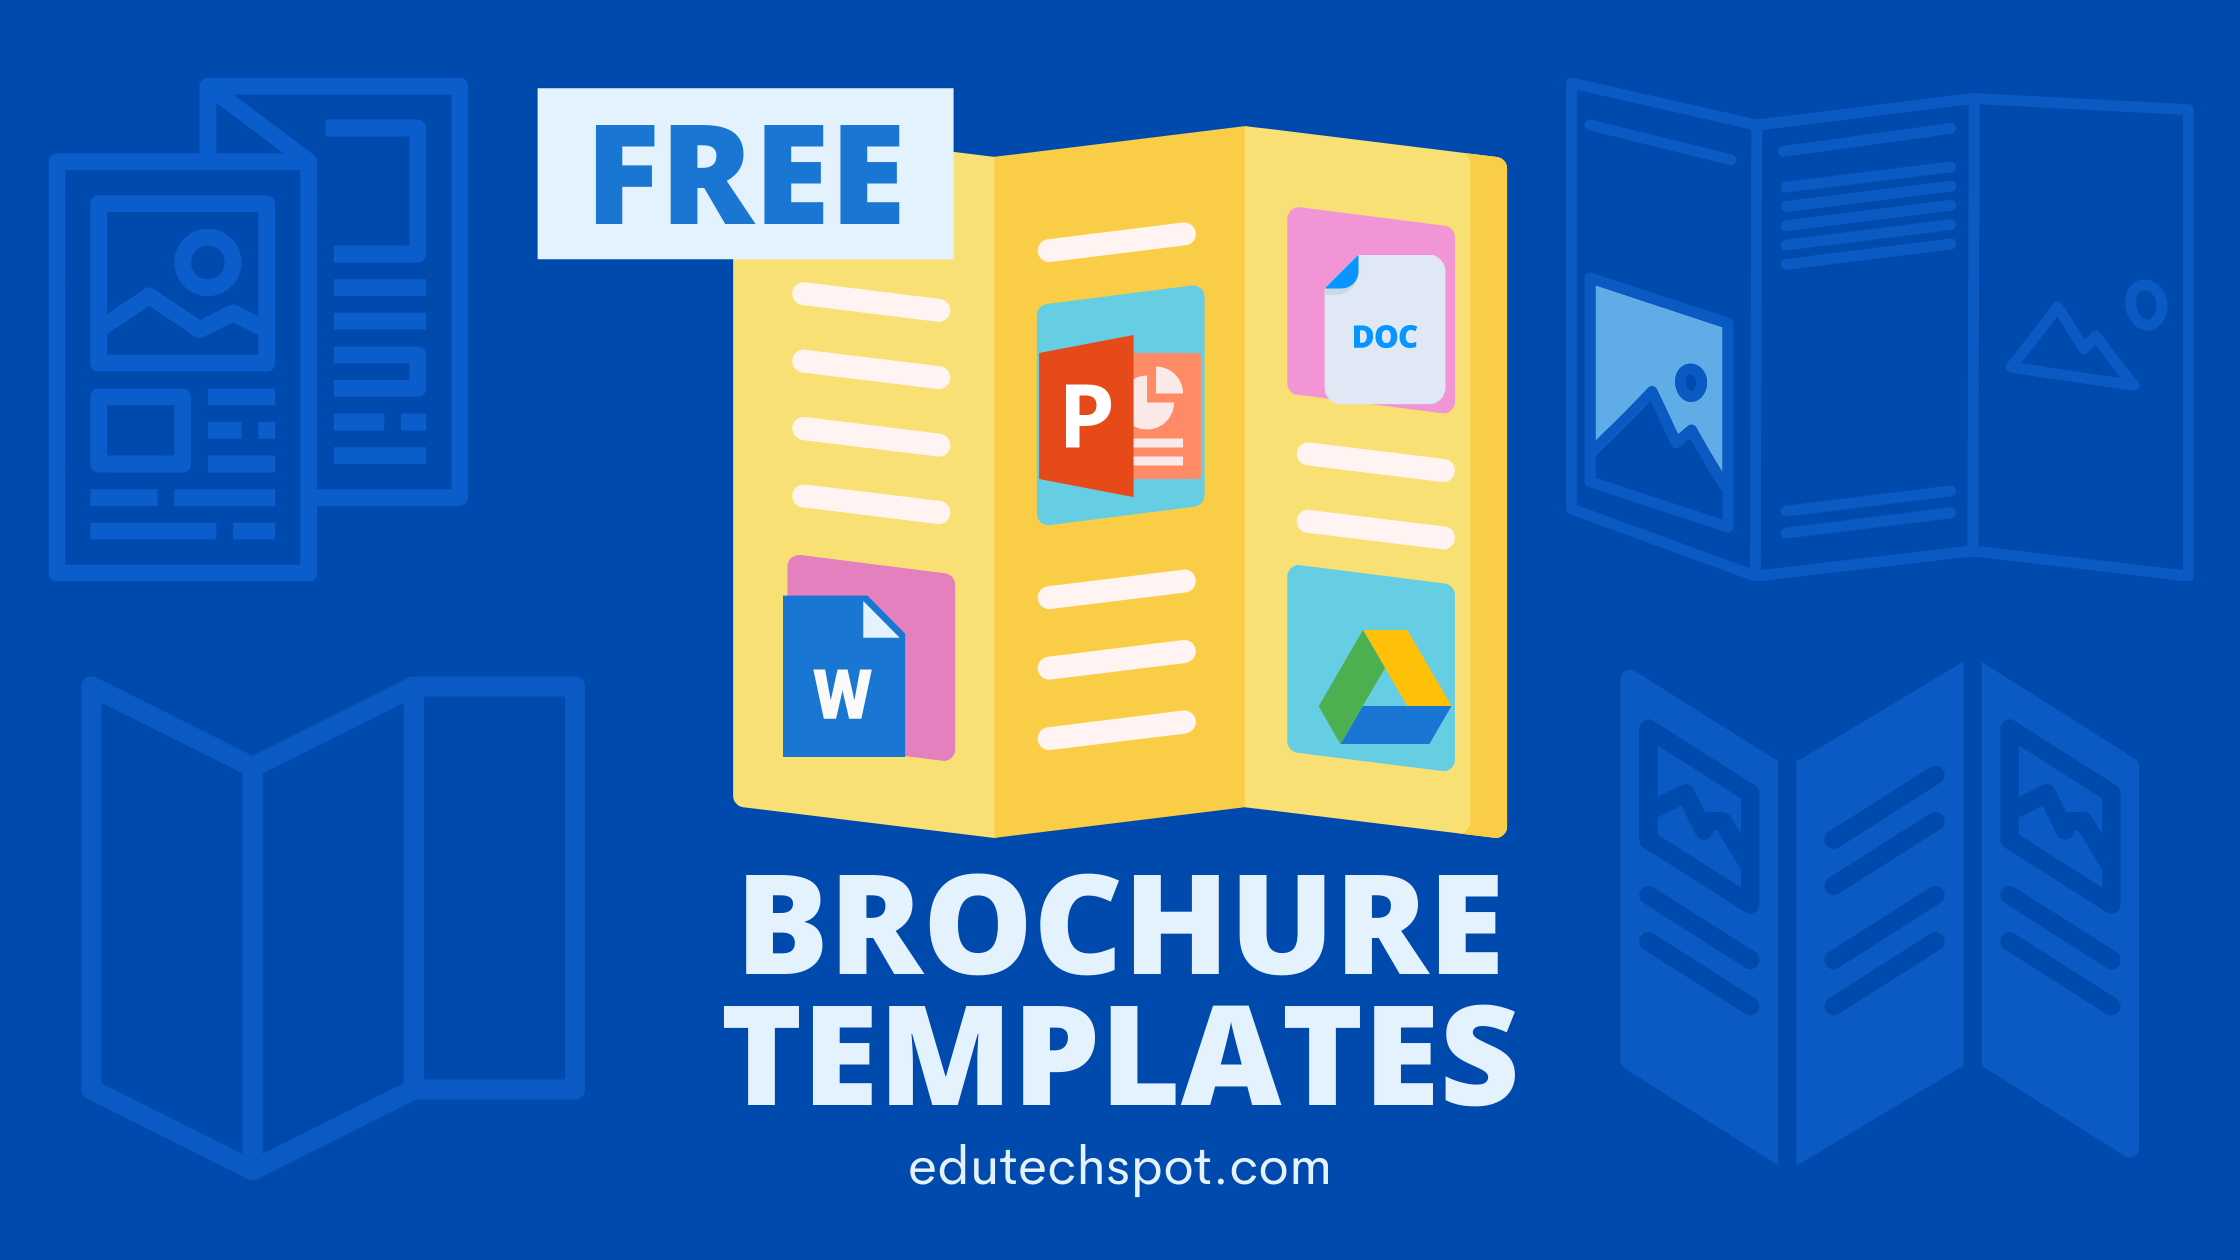 brochure-template-for-google-docs-words-power-point-slides-free